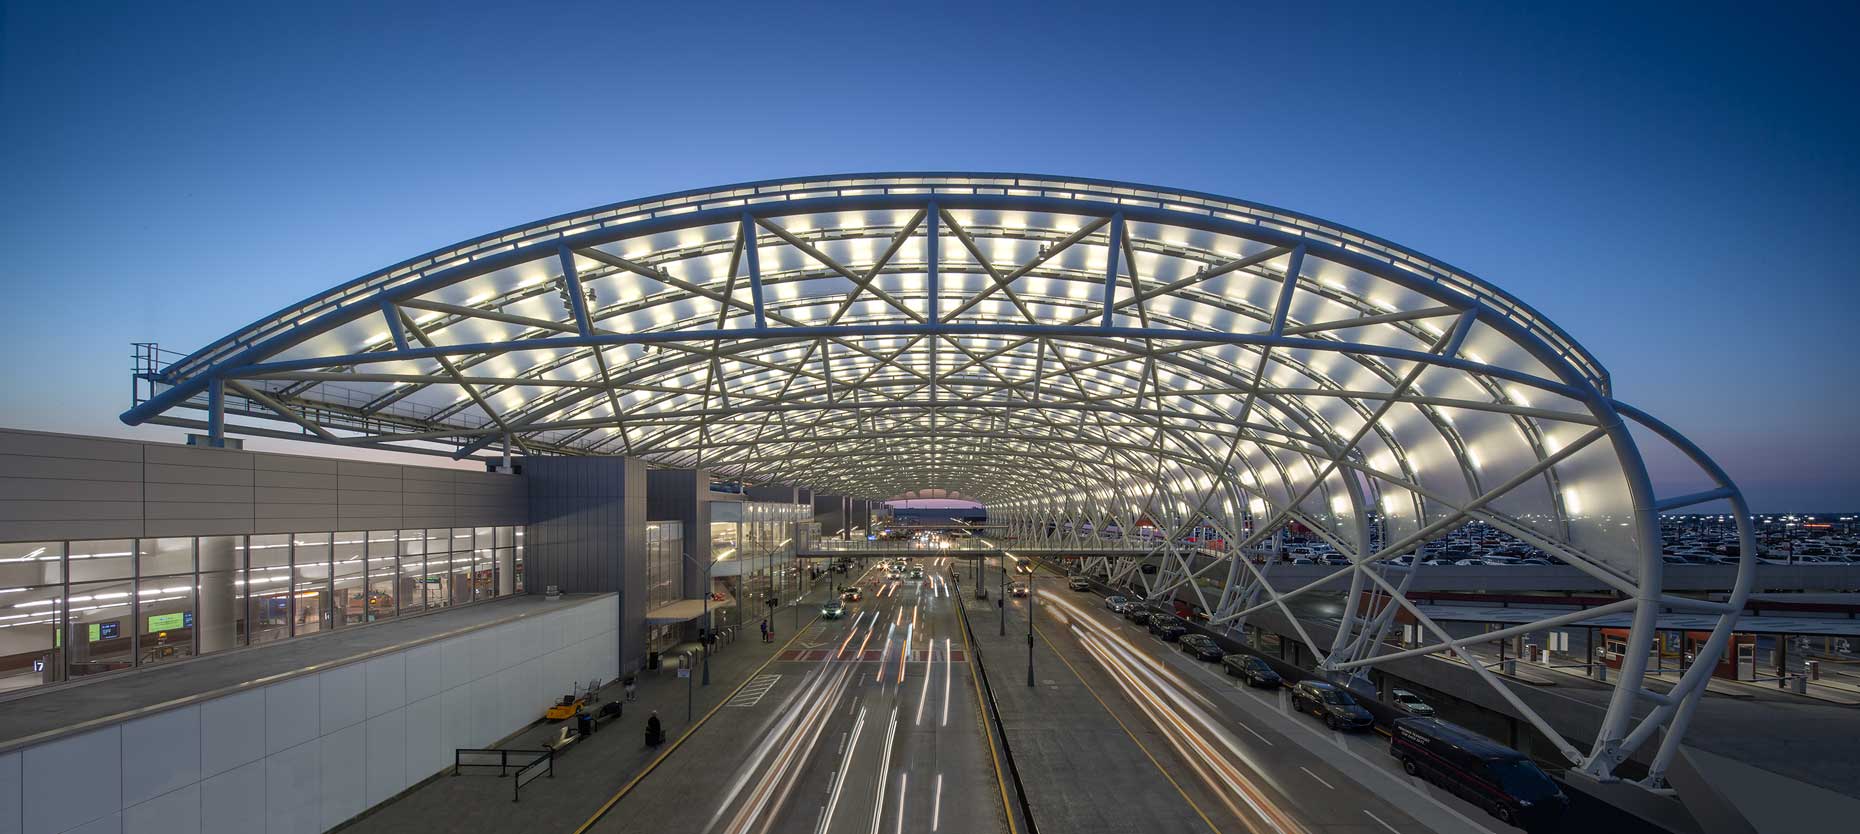 Hartsfield Jackson Atlanta International Airport | South Terminal Canopy at Dawn<br>New South-McCarthy-Synergy Joint Venture